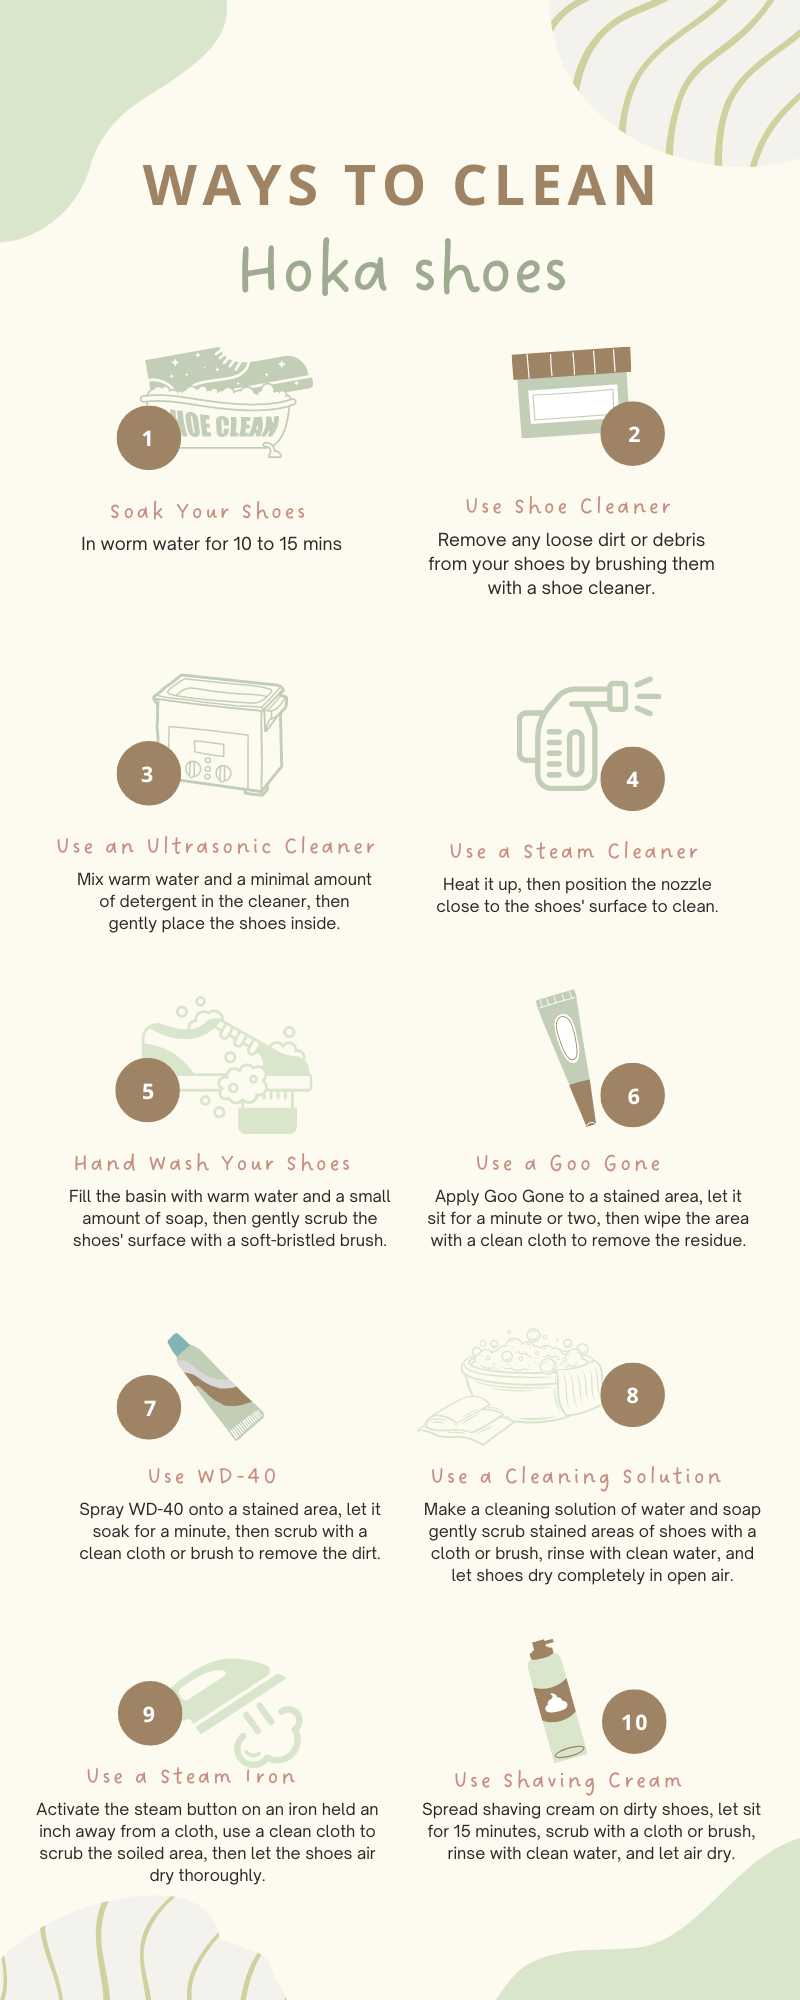 infographic on 10 ways to clean your Hoka shoes